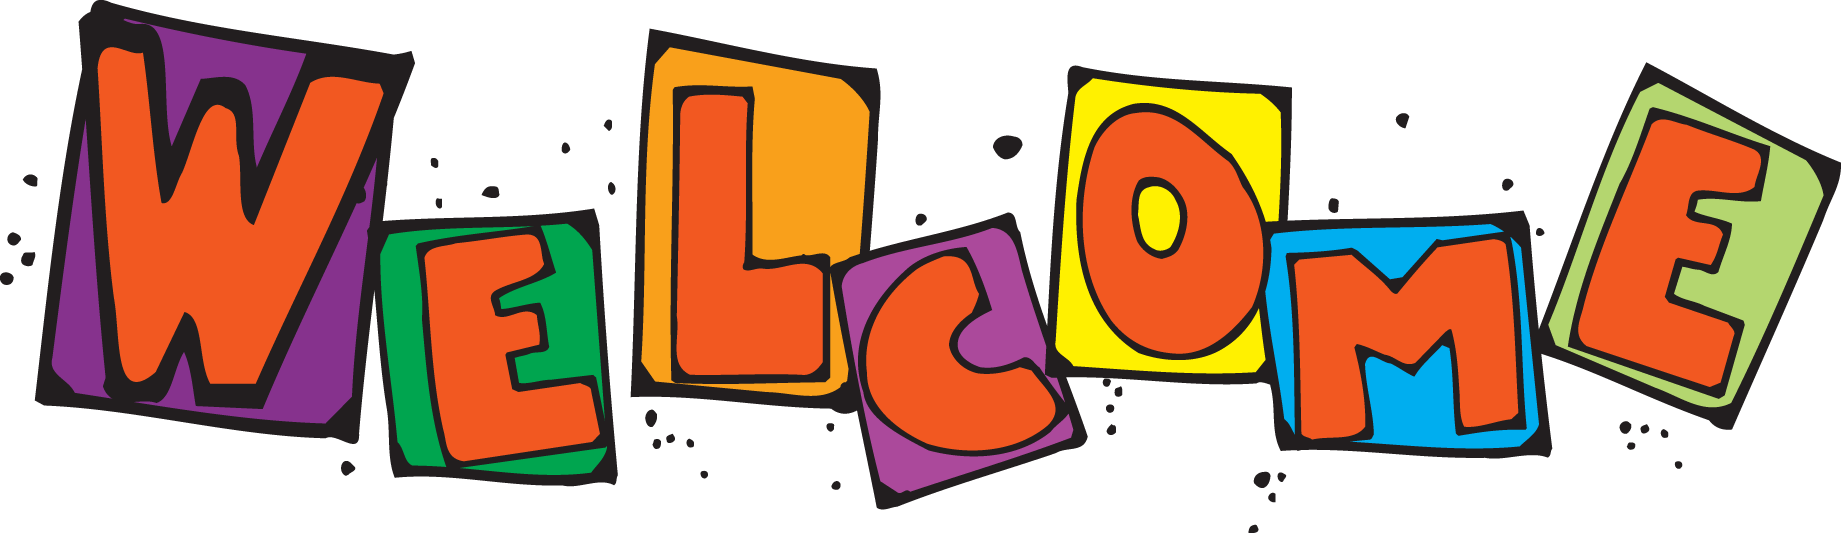 Welcome Animated Clip Art - Clipart library